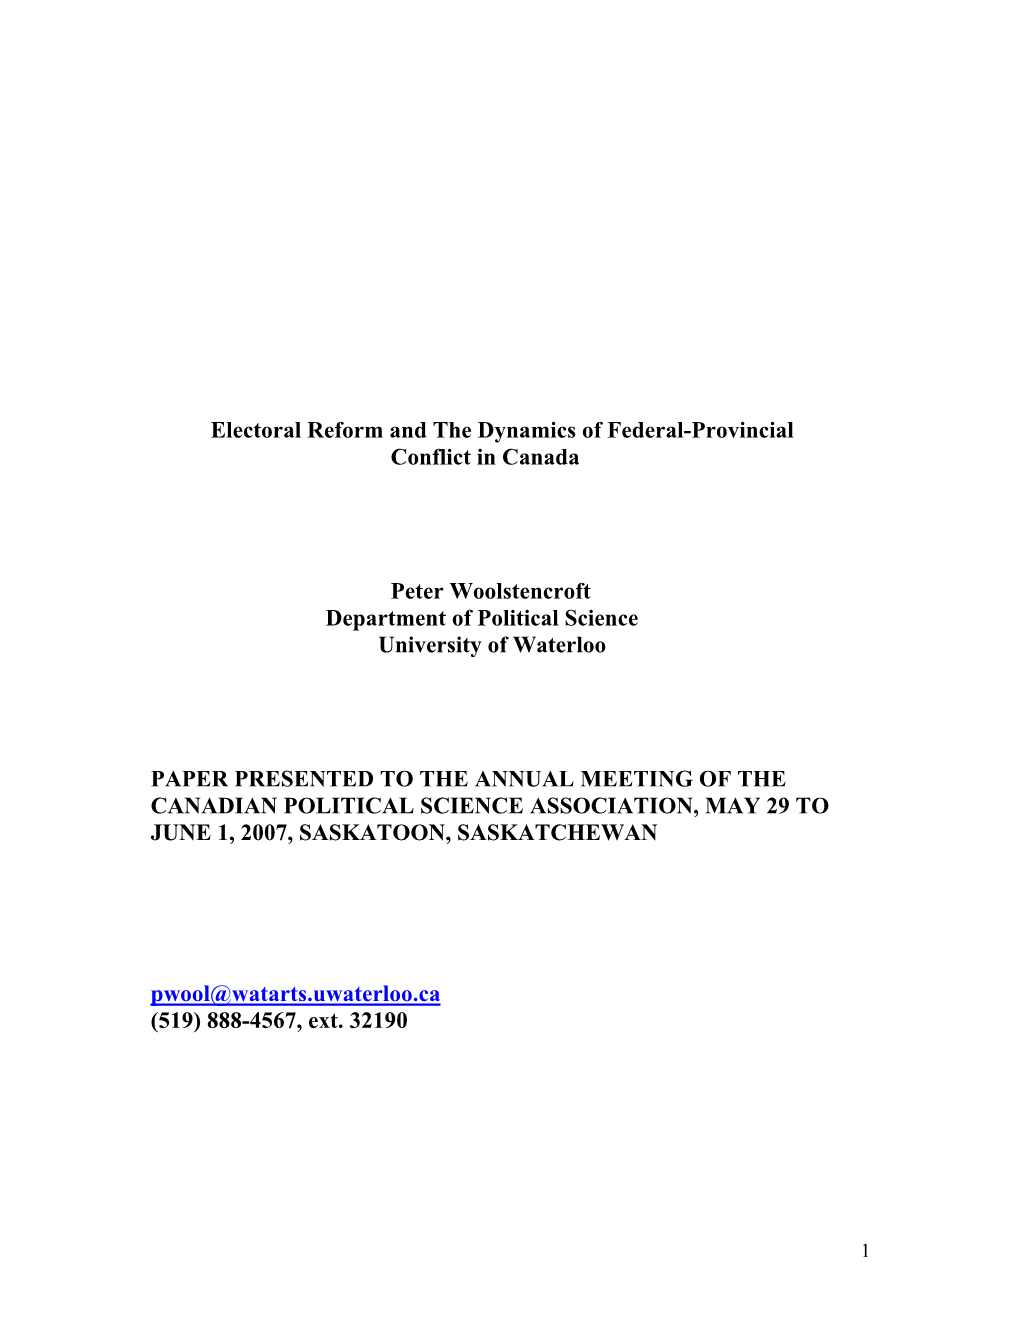 Electoral Reform and Resolution of Federal-Provincial Conflict